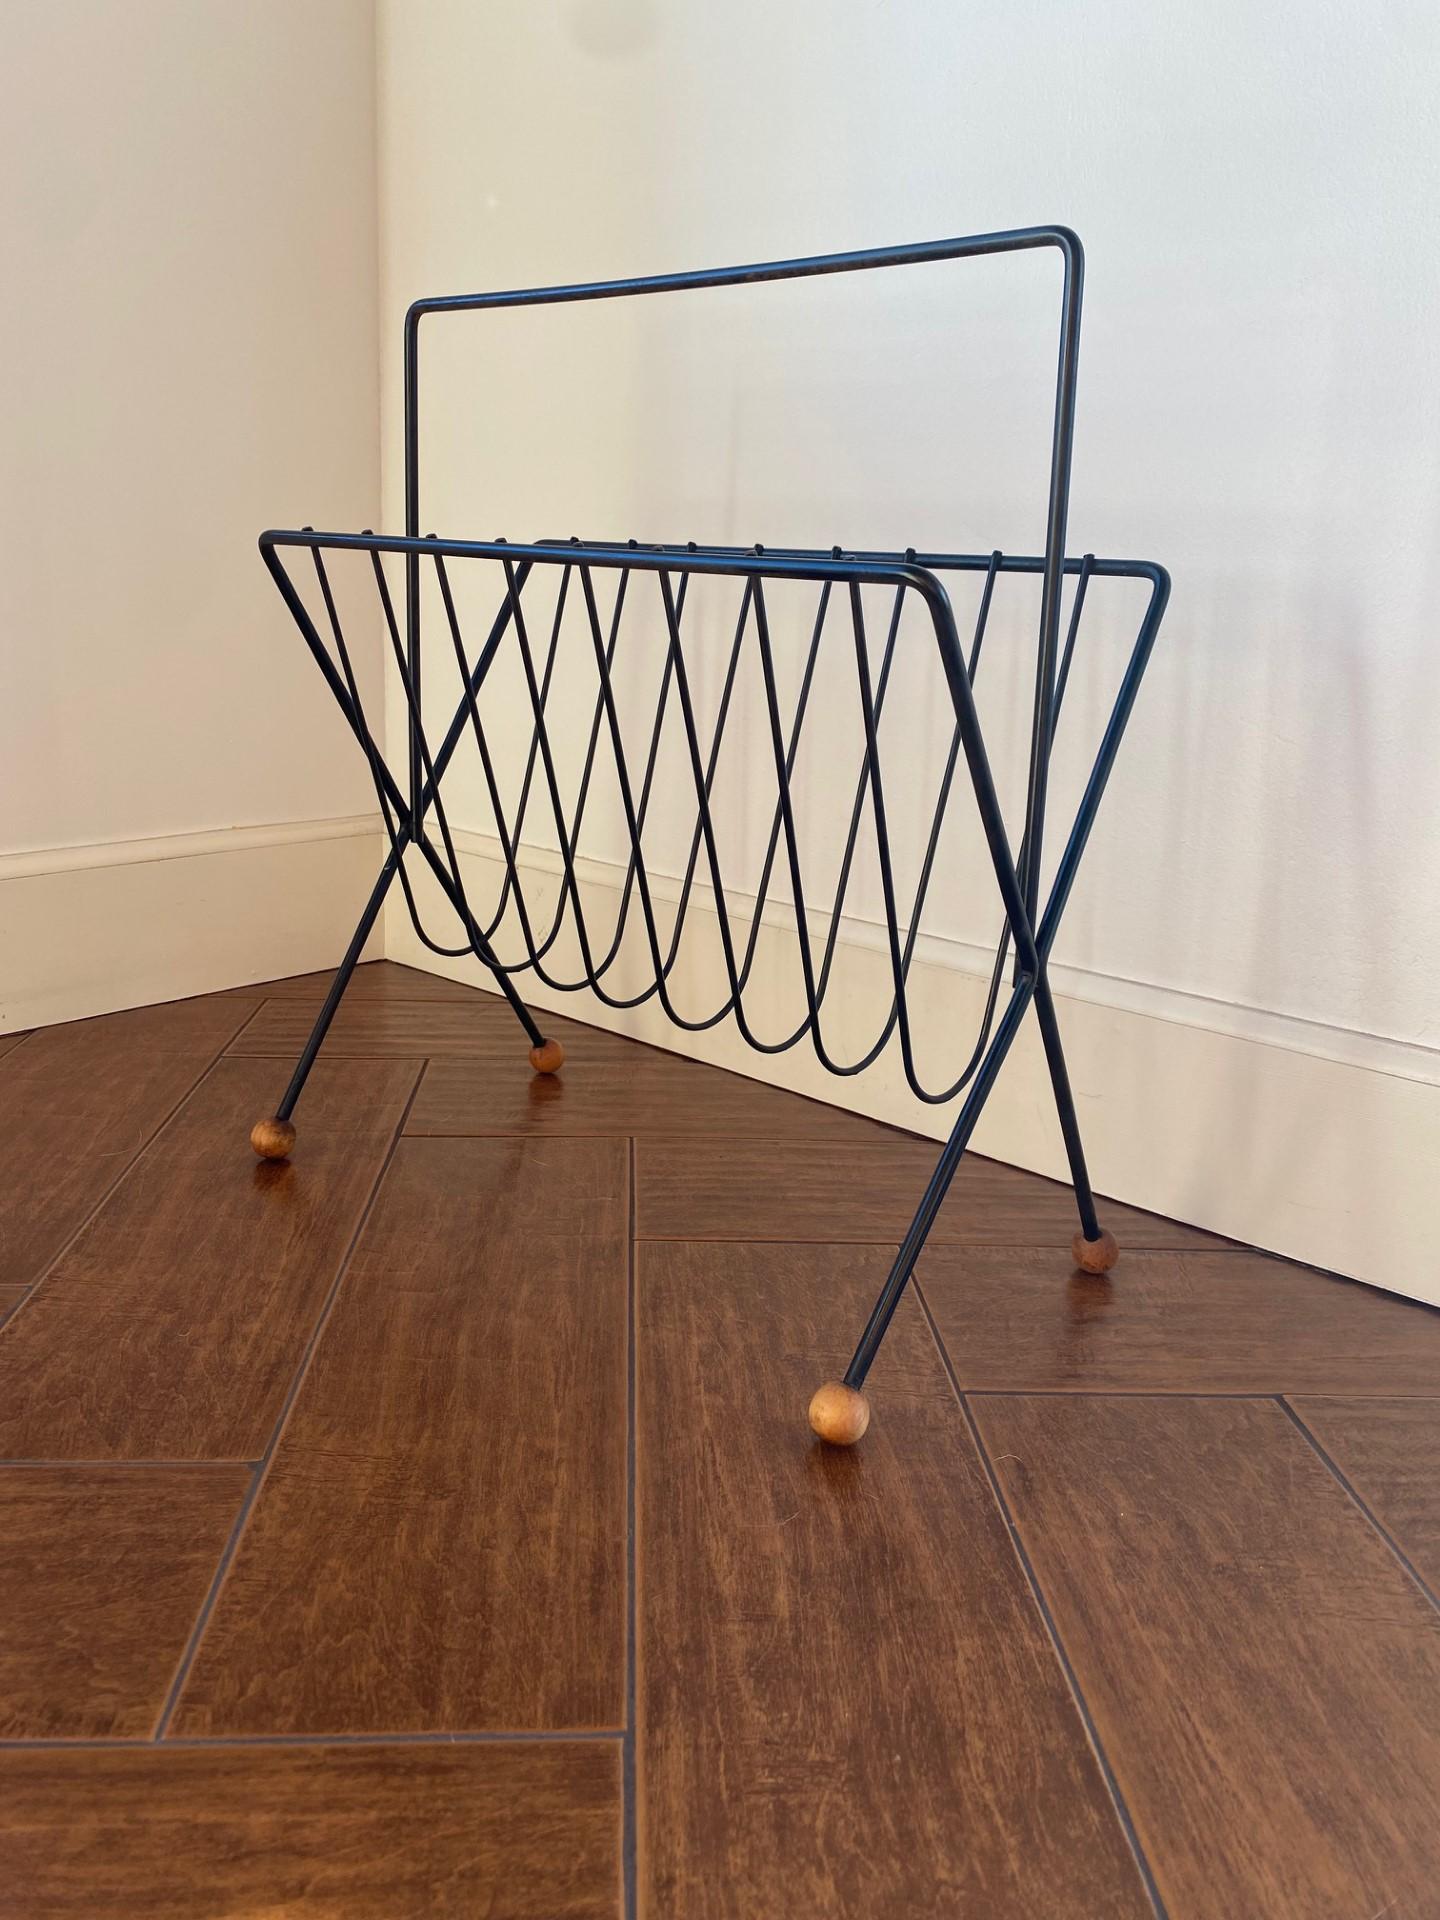 Incredibly stylish Tony Paul wrought iron and wood magazine rack for Woodlin-Hall.  Beautifully crafted as a skeletal iron frame with ball feet (wood) , this rack demands stylish attention.  In great original finish, this piece evokes pure